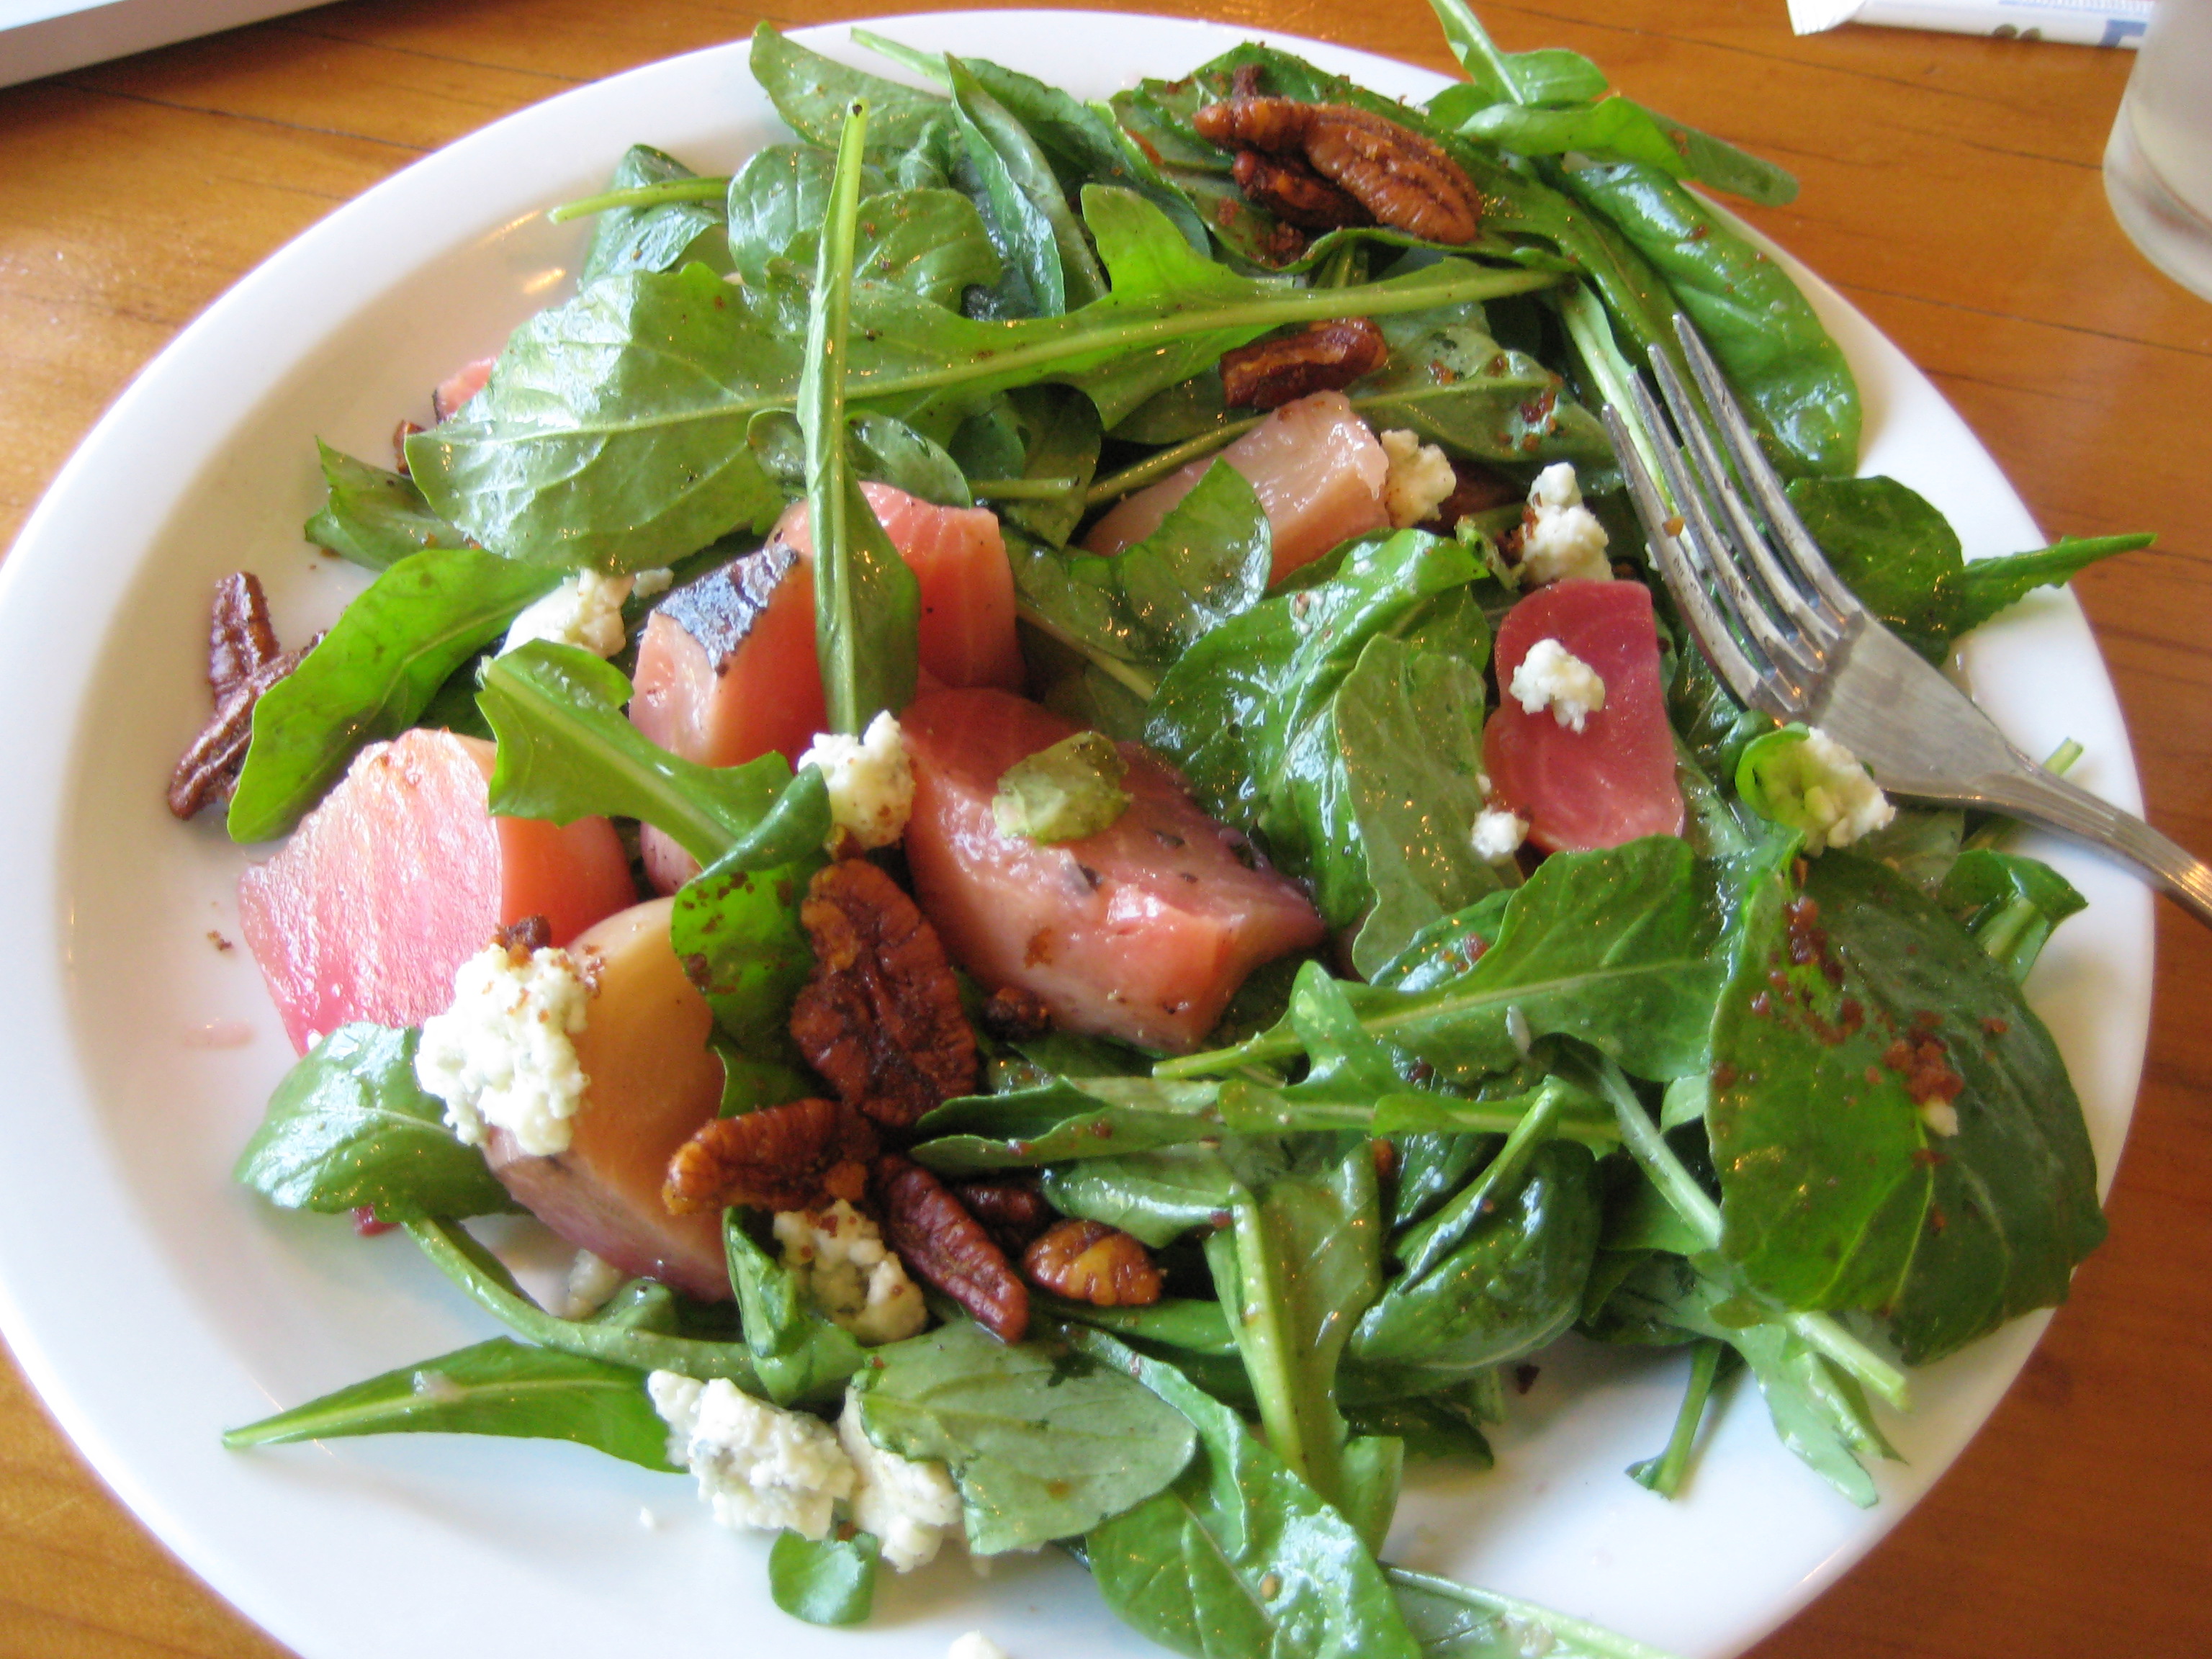 Roasted and marinated beets with arugula, pecans, and Point Reyes Bleu Cheese.  